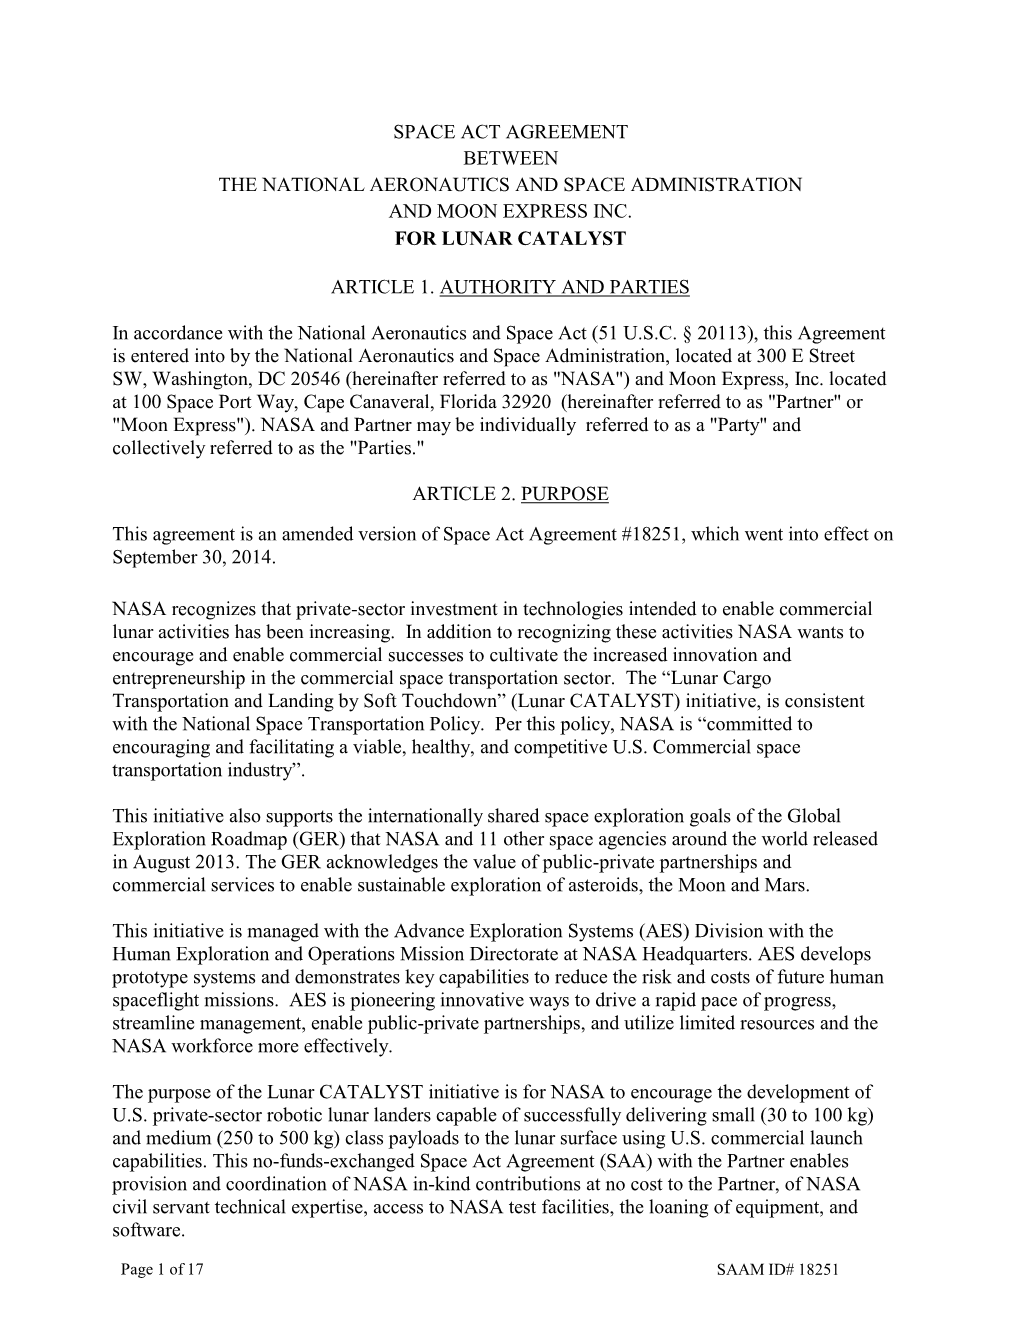 Space Act Agreement Between the National Aeronautics and Space Administration and Moon Express Inc. for Lunar Catalyst Article 1